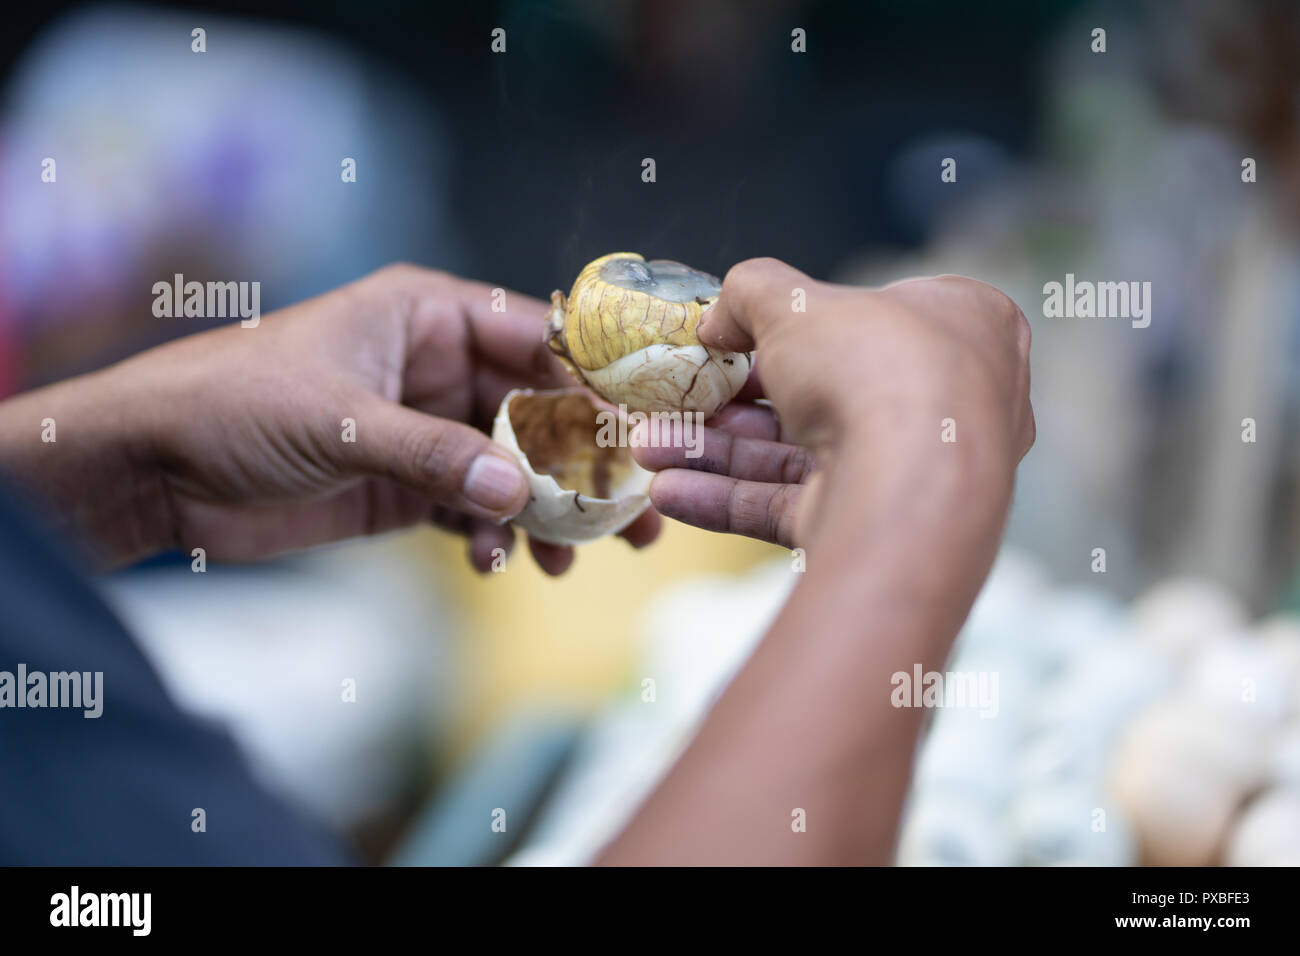 Balut is a fertilized duck egg incubated between 14-21 days then boiled or steamed.Considered a delicacy in the Philippines,commonly eaten as a snack  Stock Photo